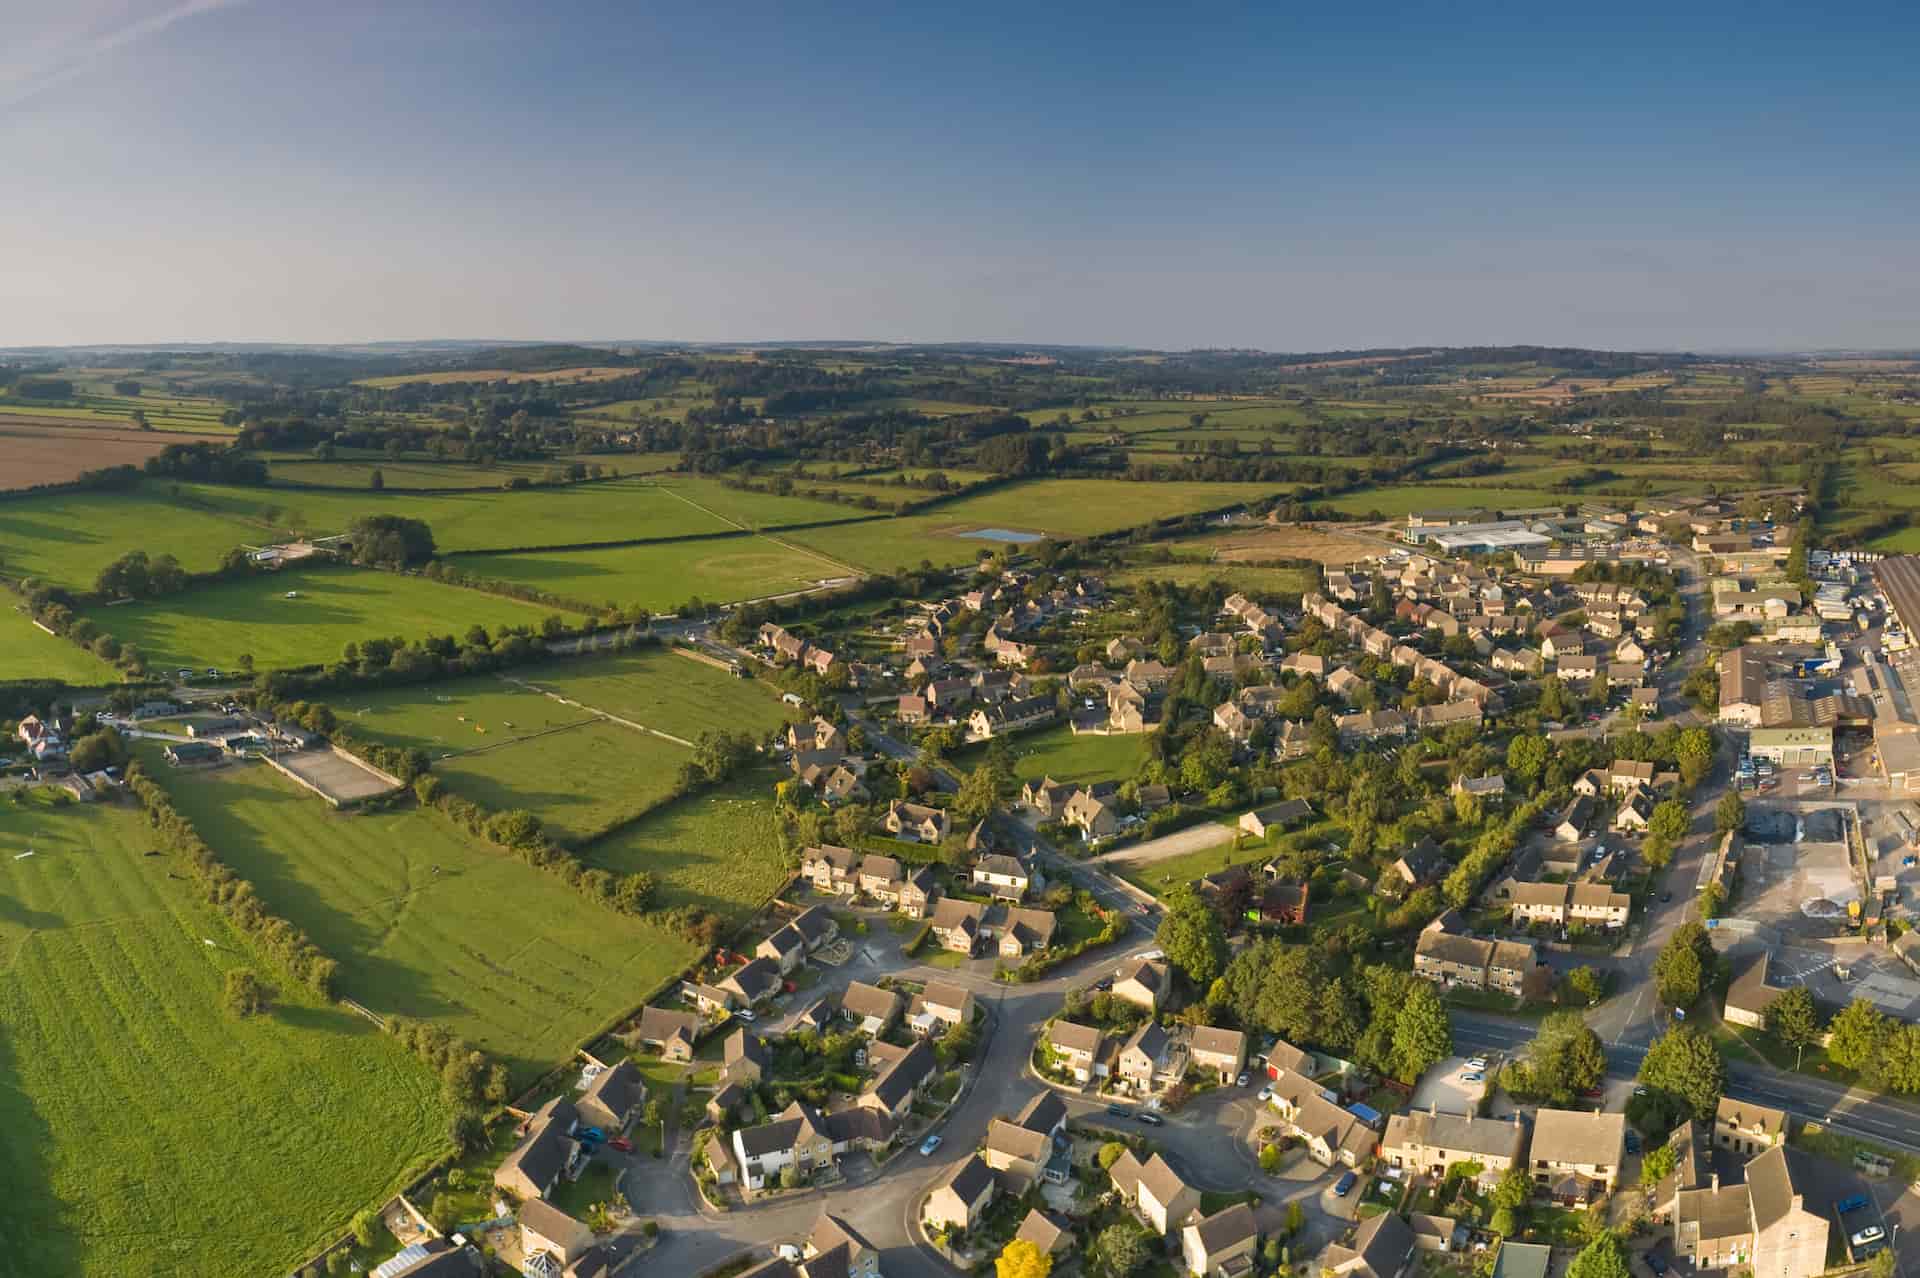 A satalite view of an off grid town in the UK with green fields to the left and blue sky with no clouds